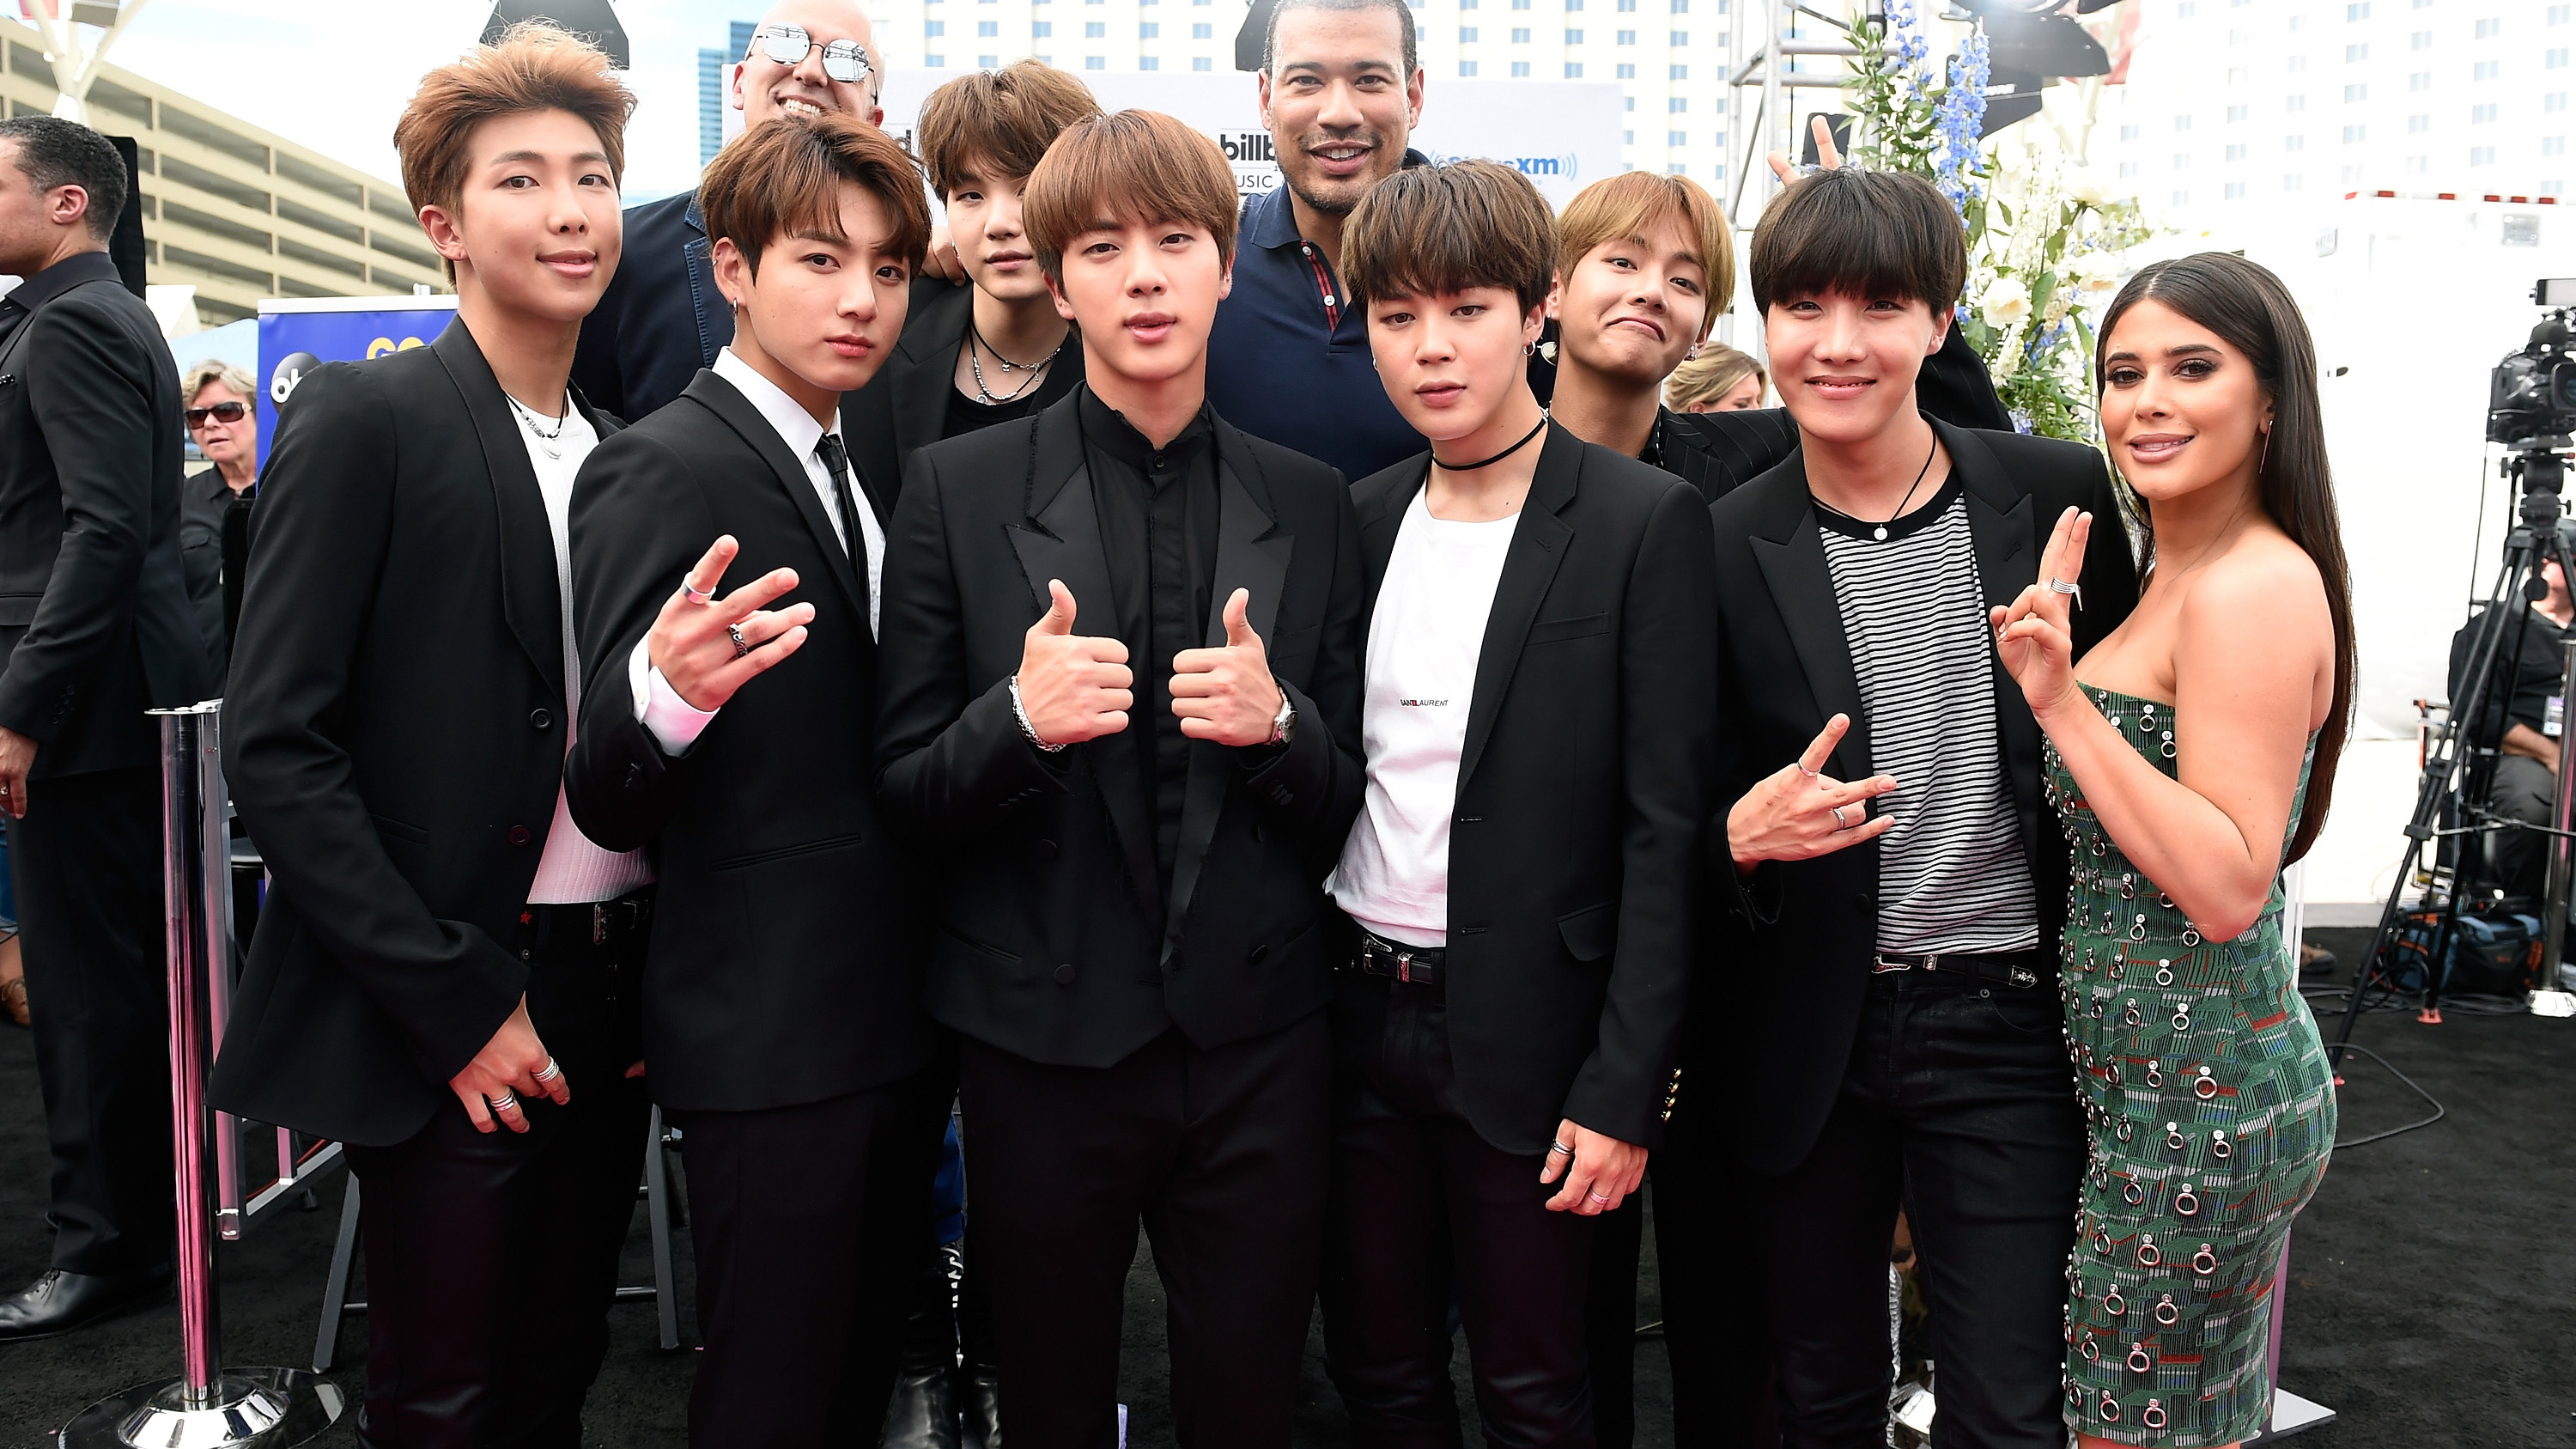 Bts Bangtan Boys Wallpaper Full Hd Free Download - Bts Pictures With Fans -  3000x1687 Wallpaper 